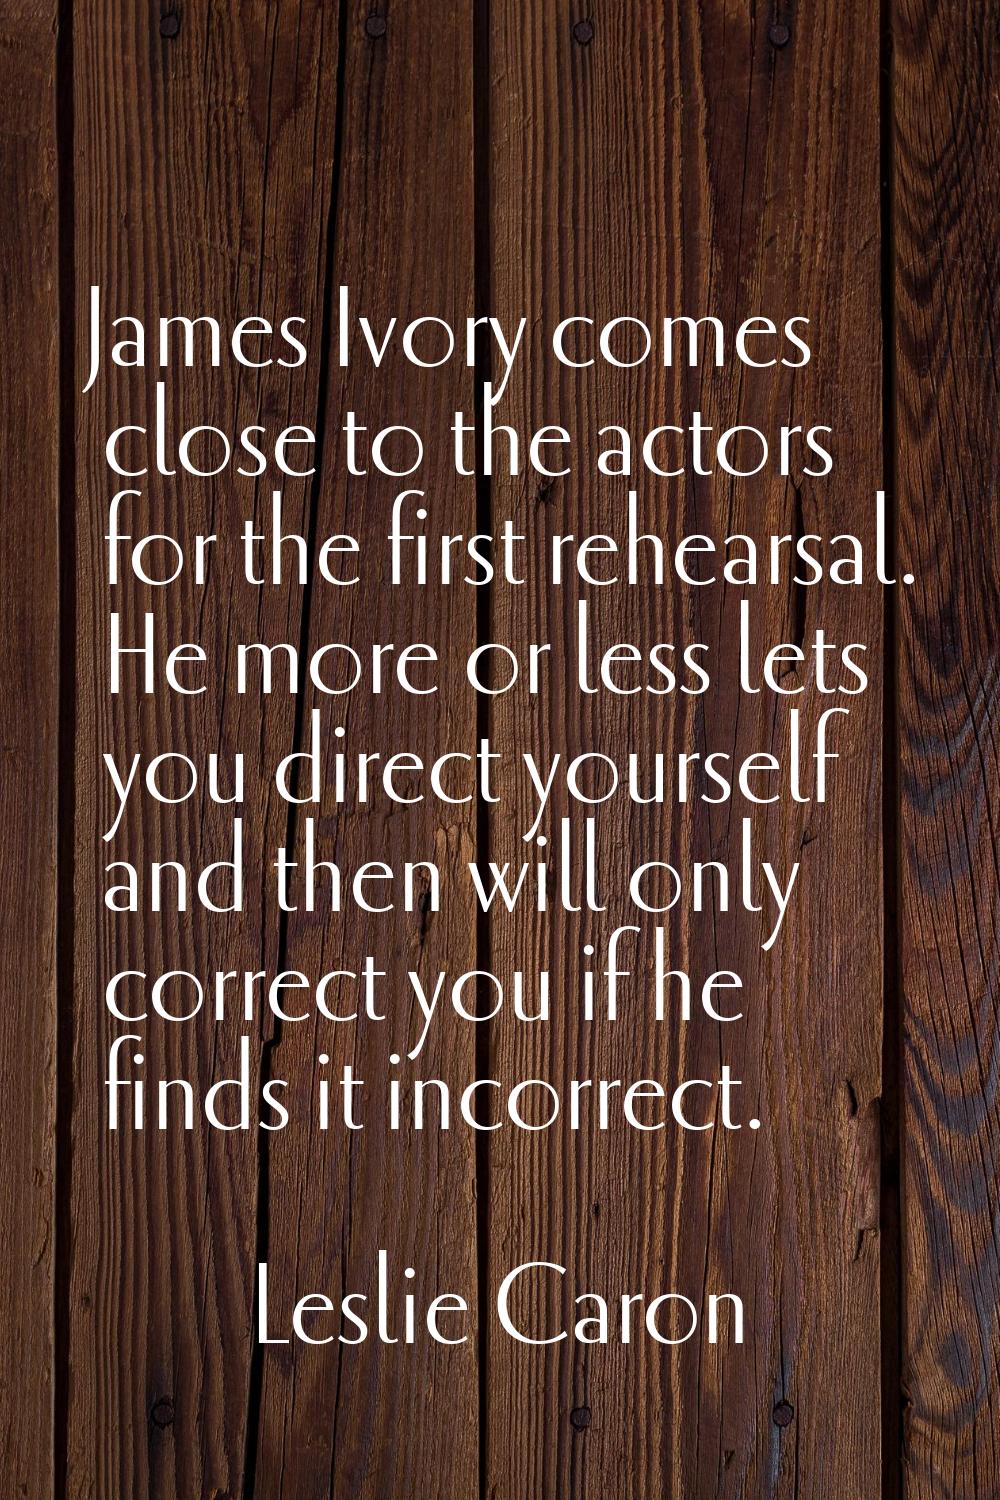 James Ivory comes close to the actors for the first rehearsal. He more or less lets you direct your